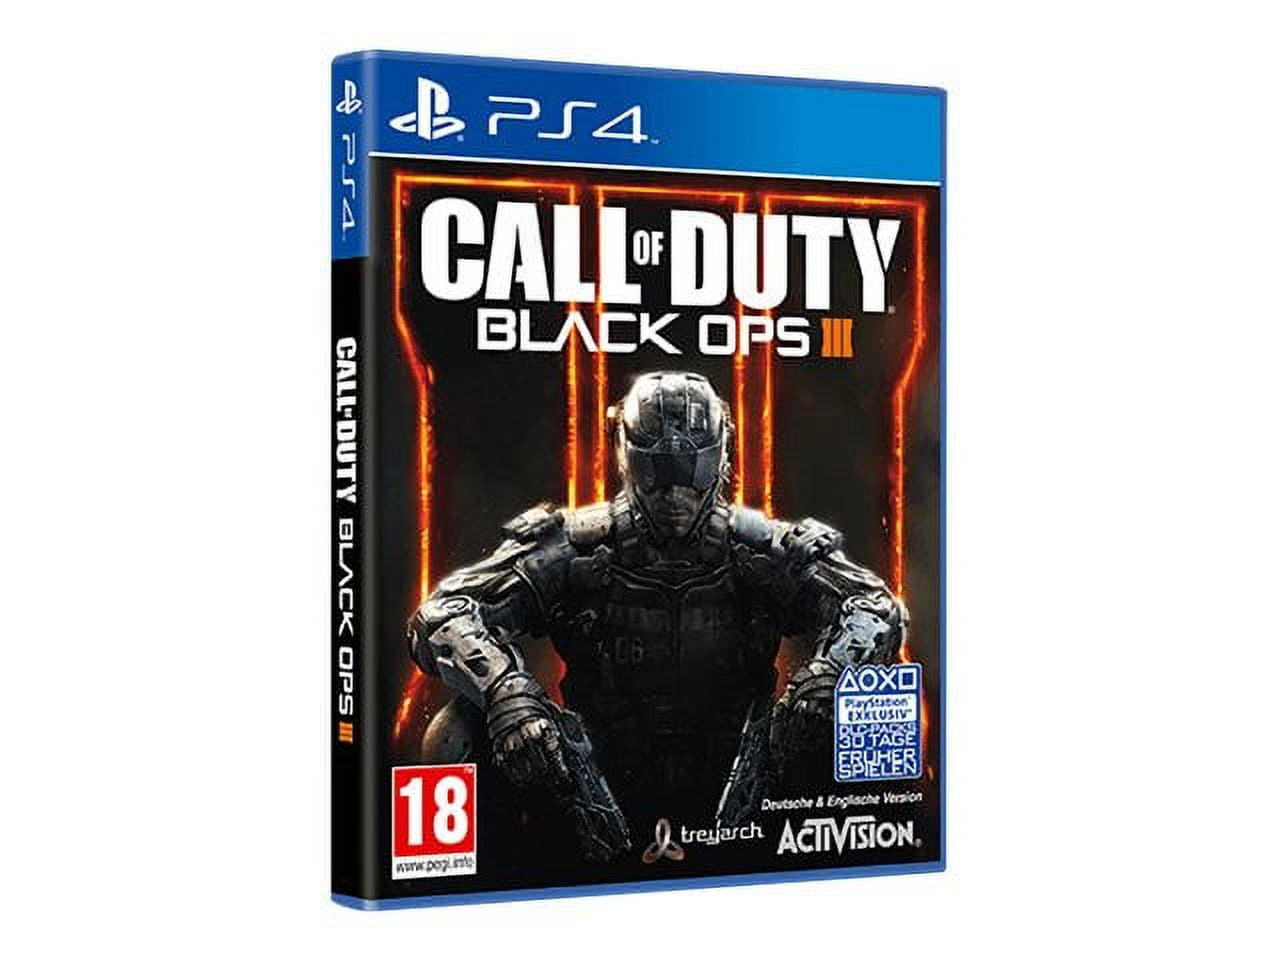 Call Of Duty Black Ops 3 - Pre-Owned, Activision, PlayStation 4, Physical